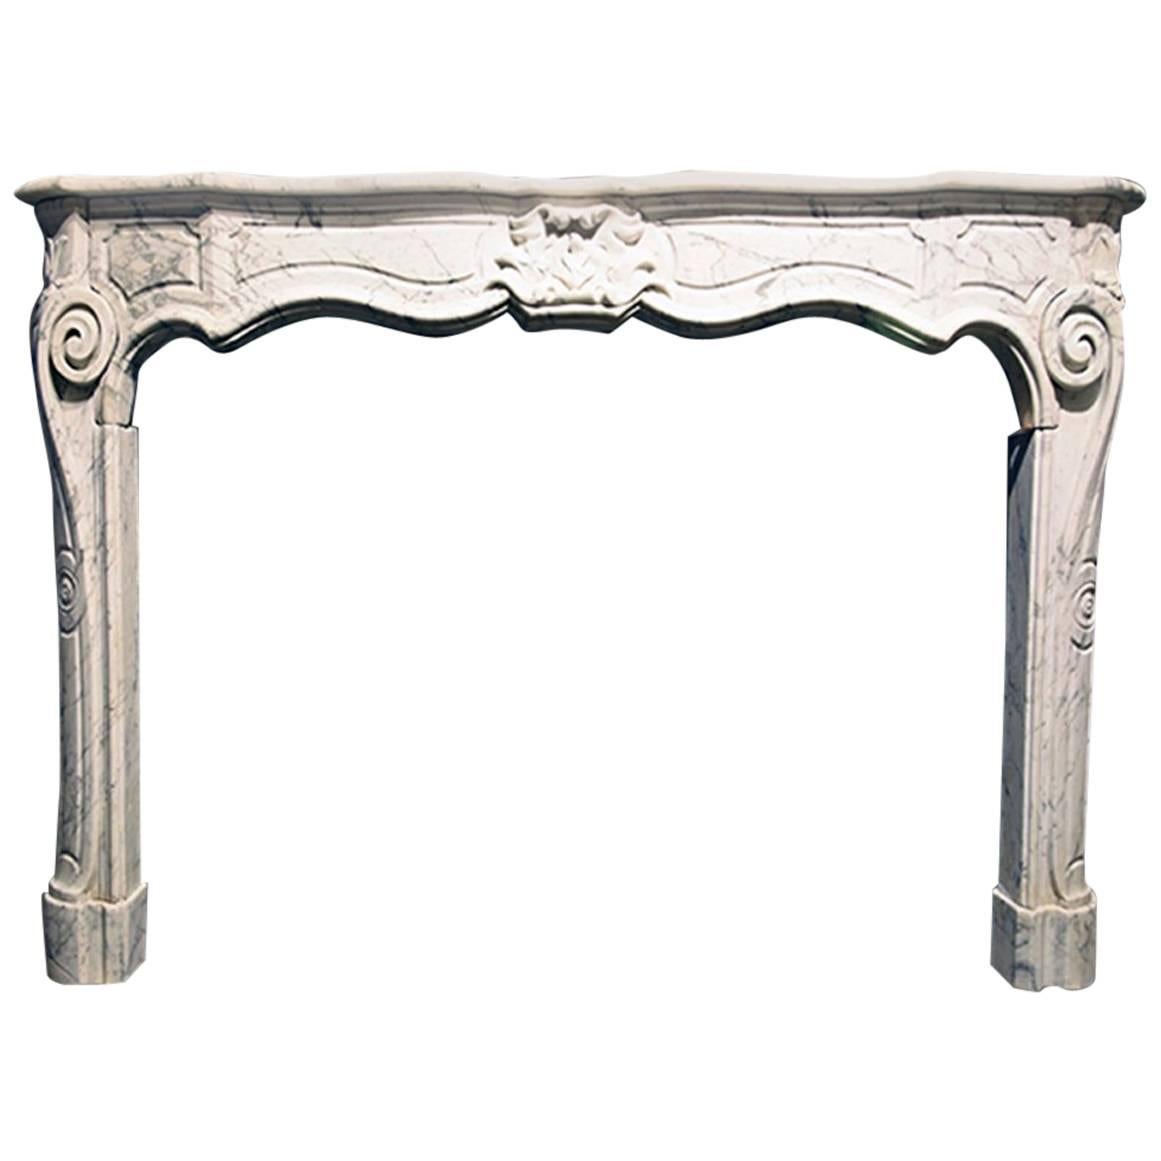 Exclusive Antique Marble Fireplace Louis XV Mantel 19th Century